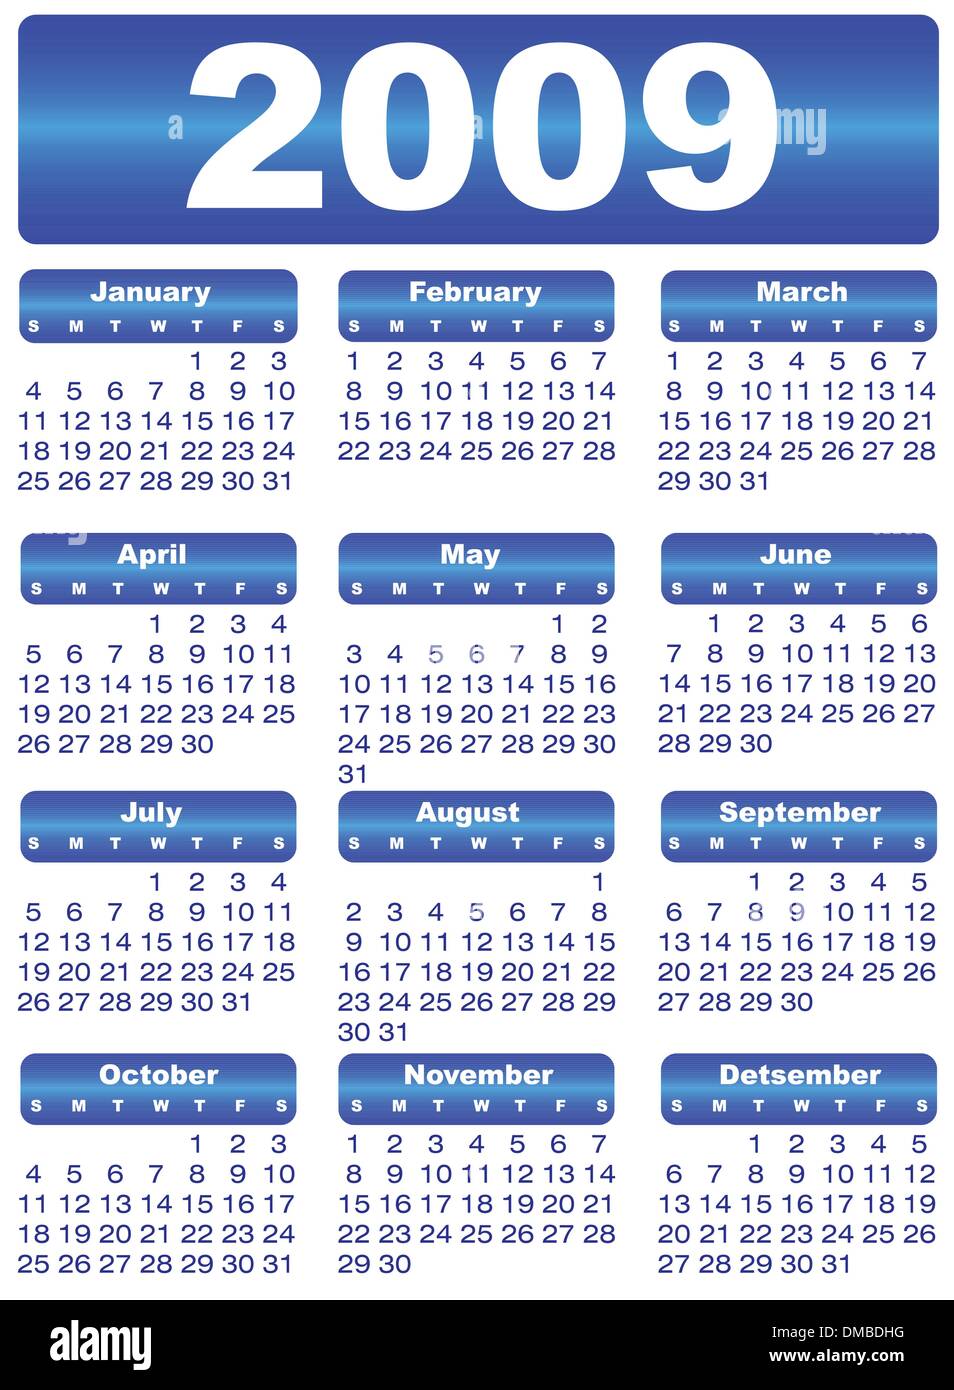 Calendar 2009 High Resolution Stock Photography And Images Alamy